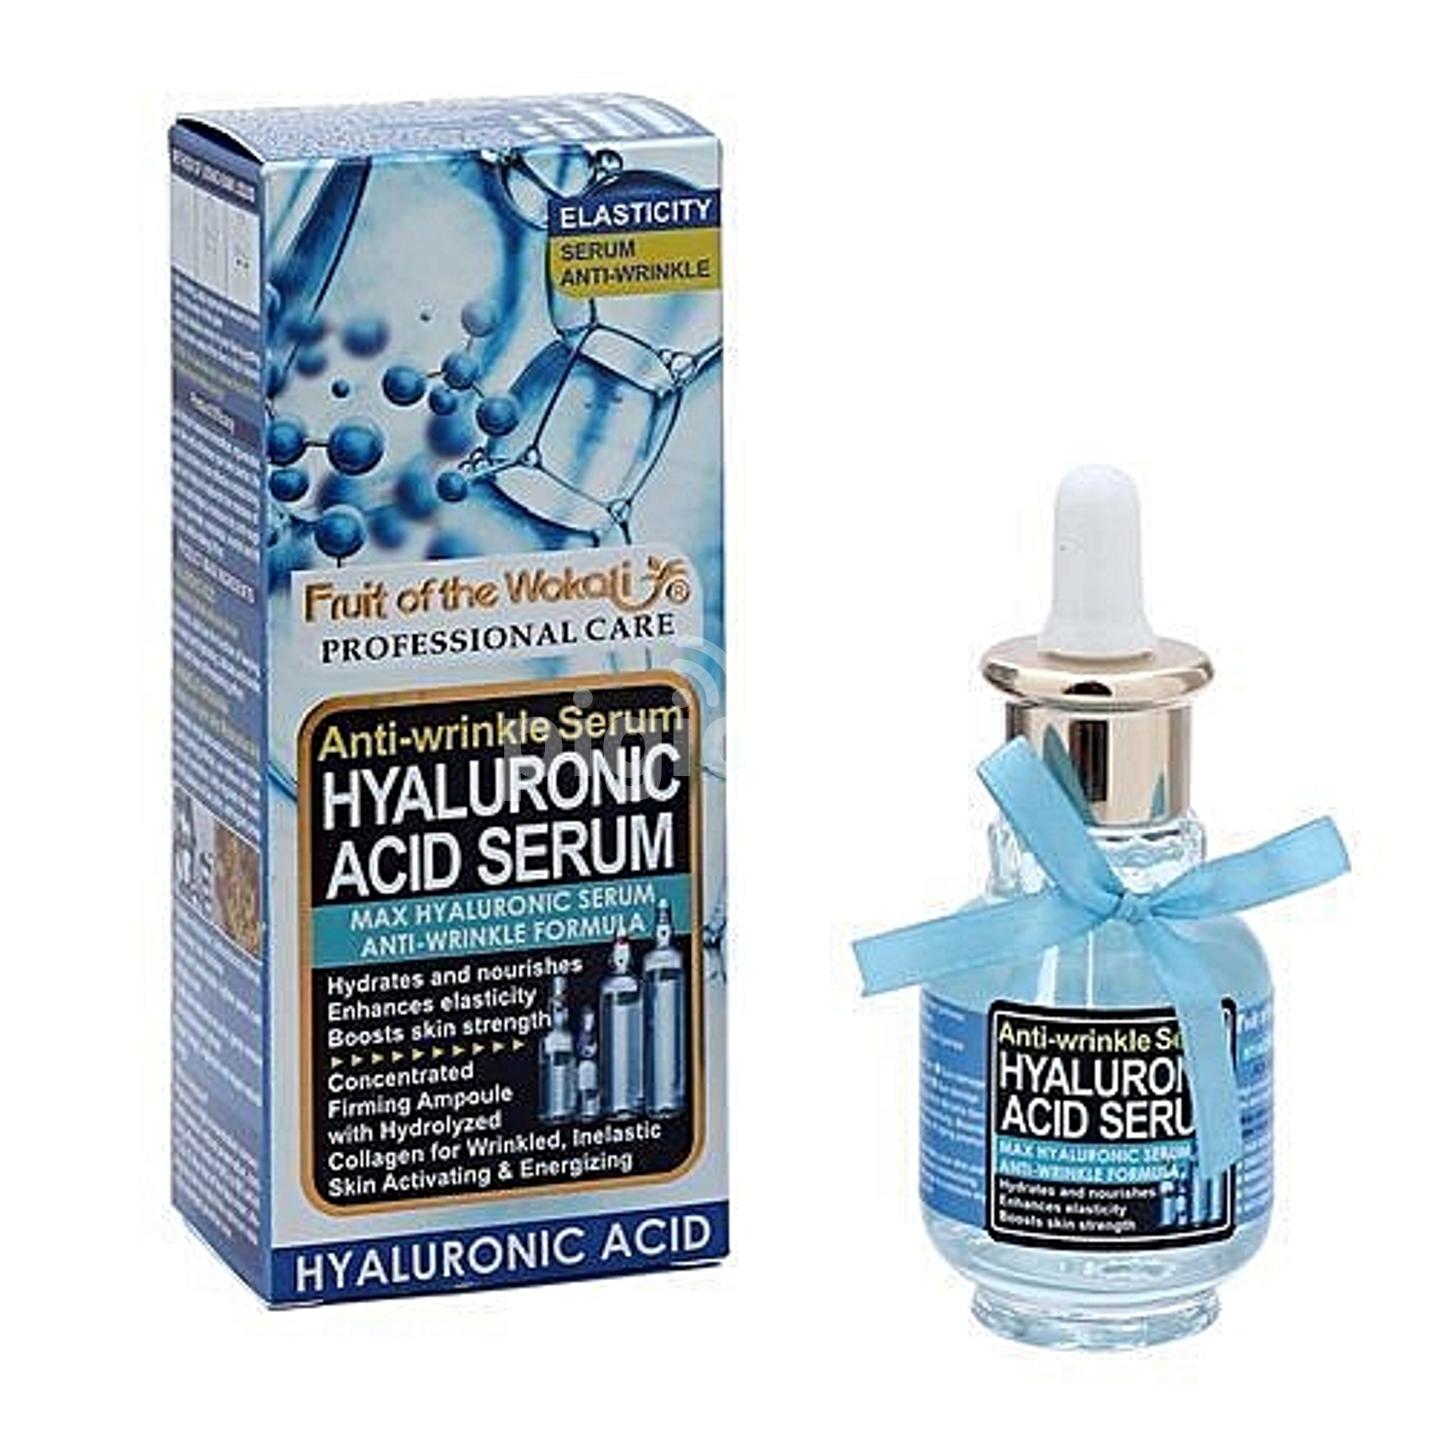 Anti Wrinkle Serum Hyaluronic Acid Firming And Collagen Serum 40 Ml Buy Online At Best Prices In Nepal Daraz Com Np